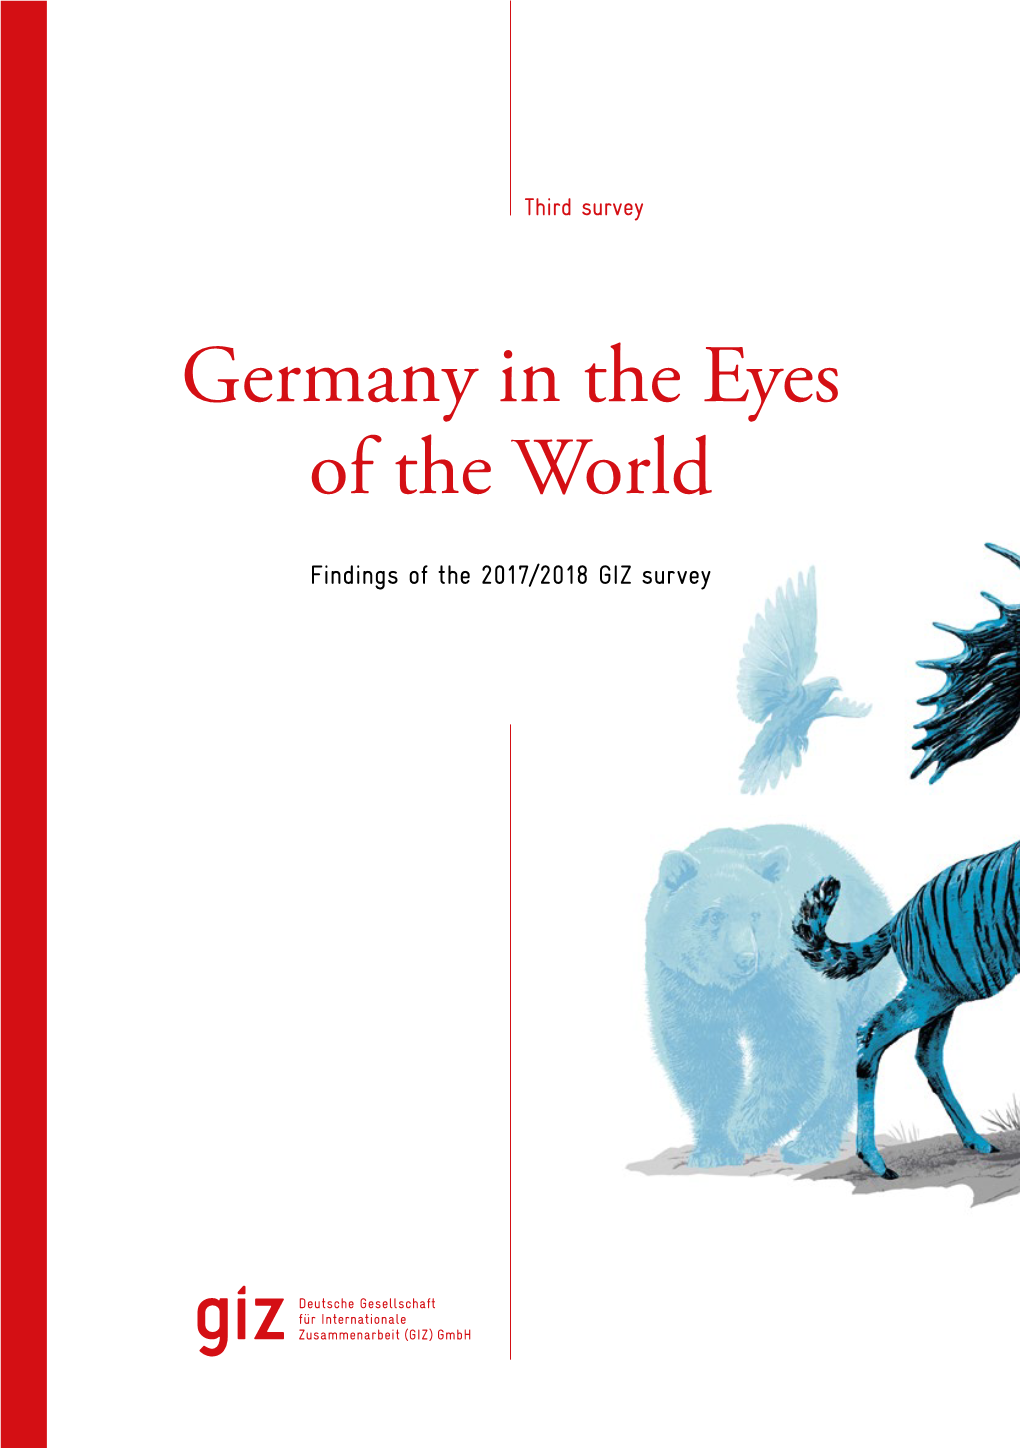 Germany in the Eyes of the World